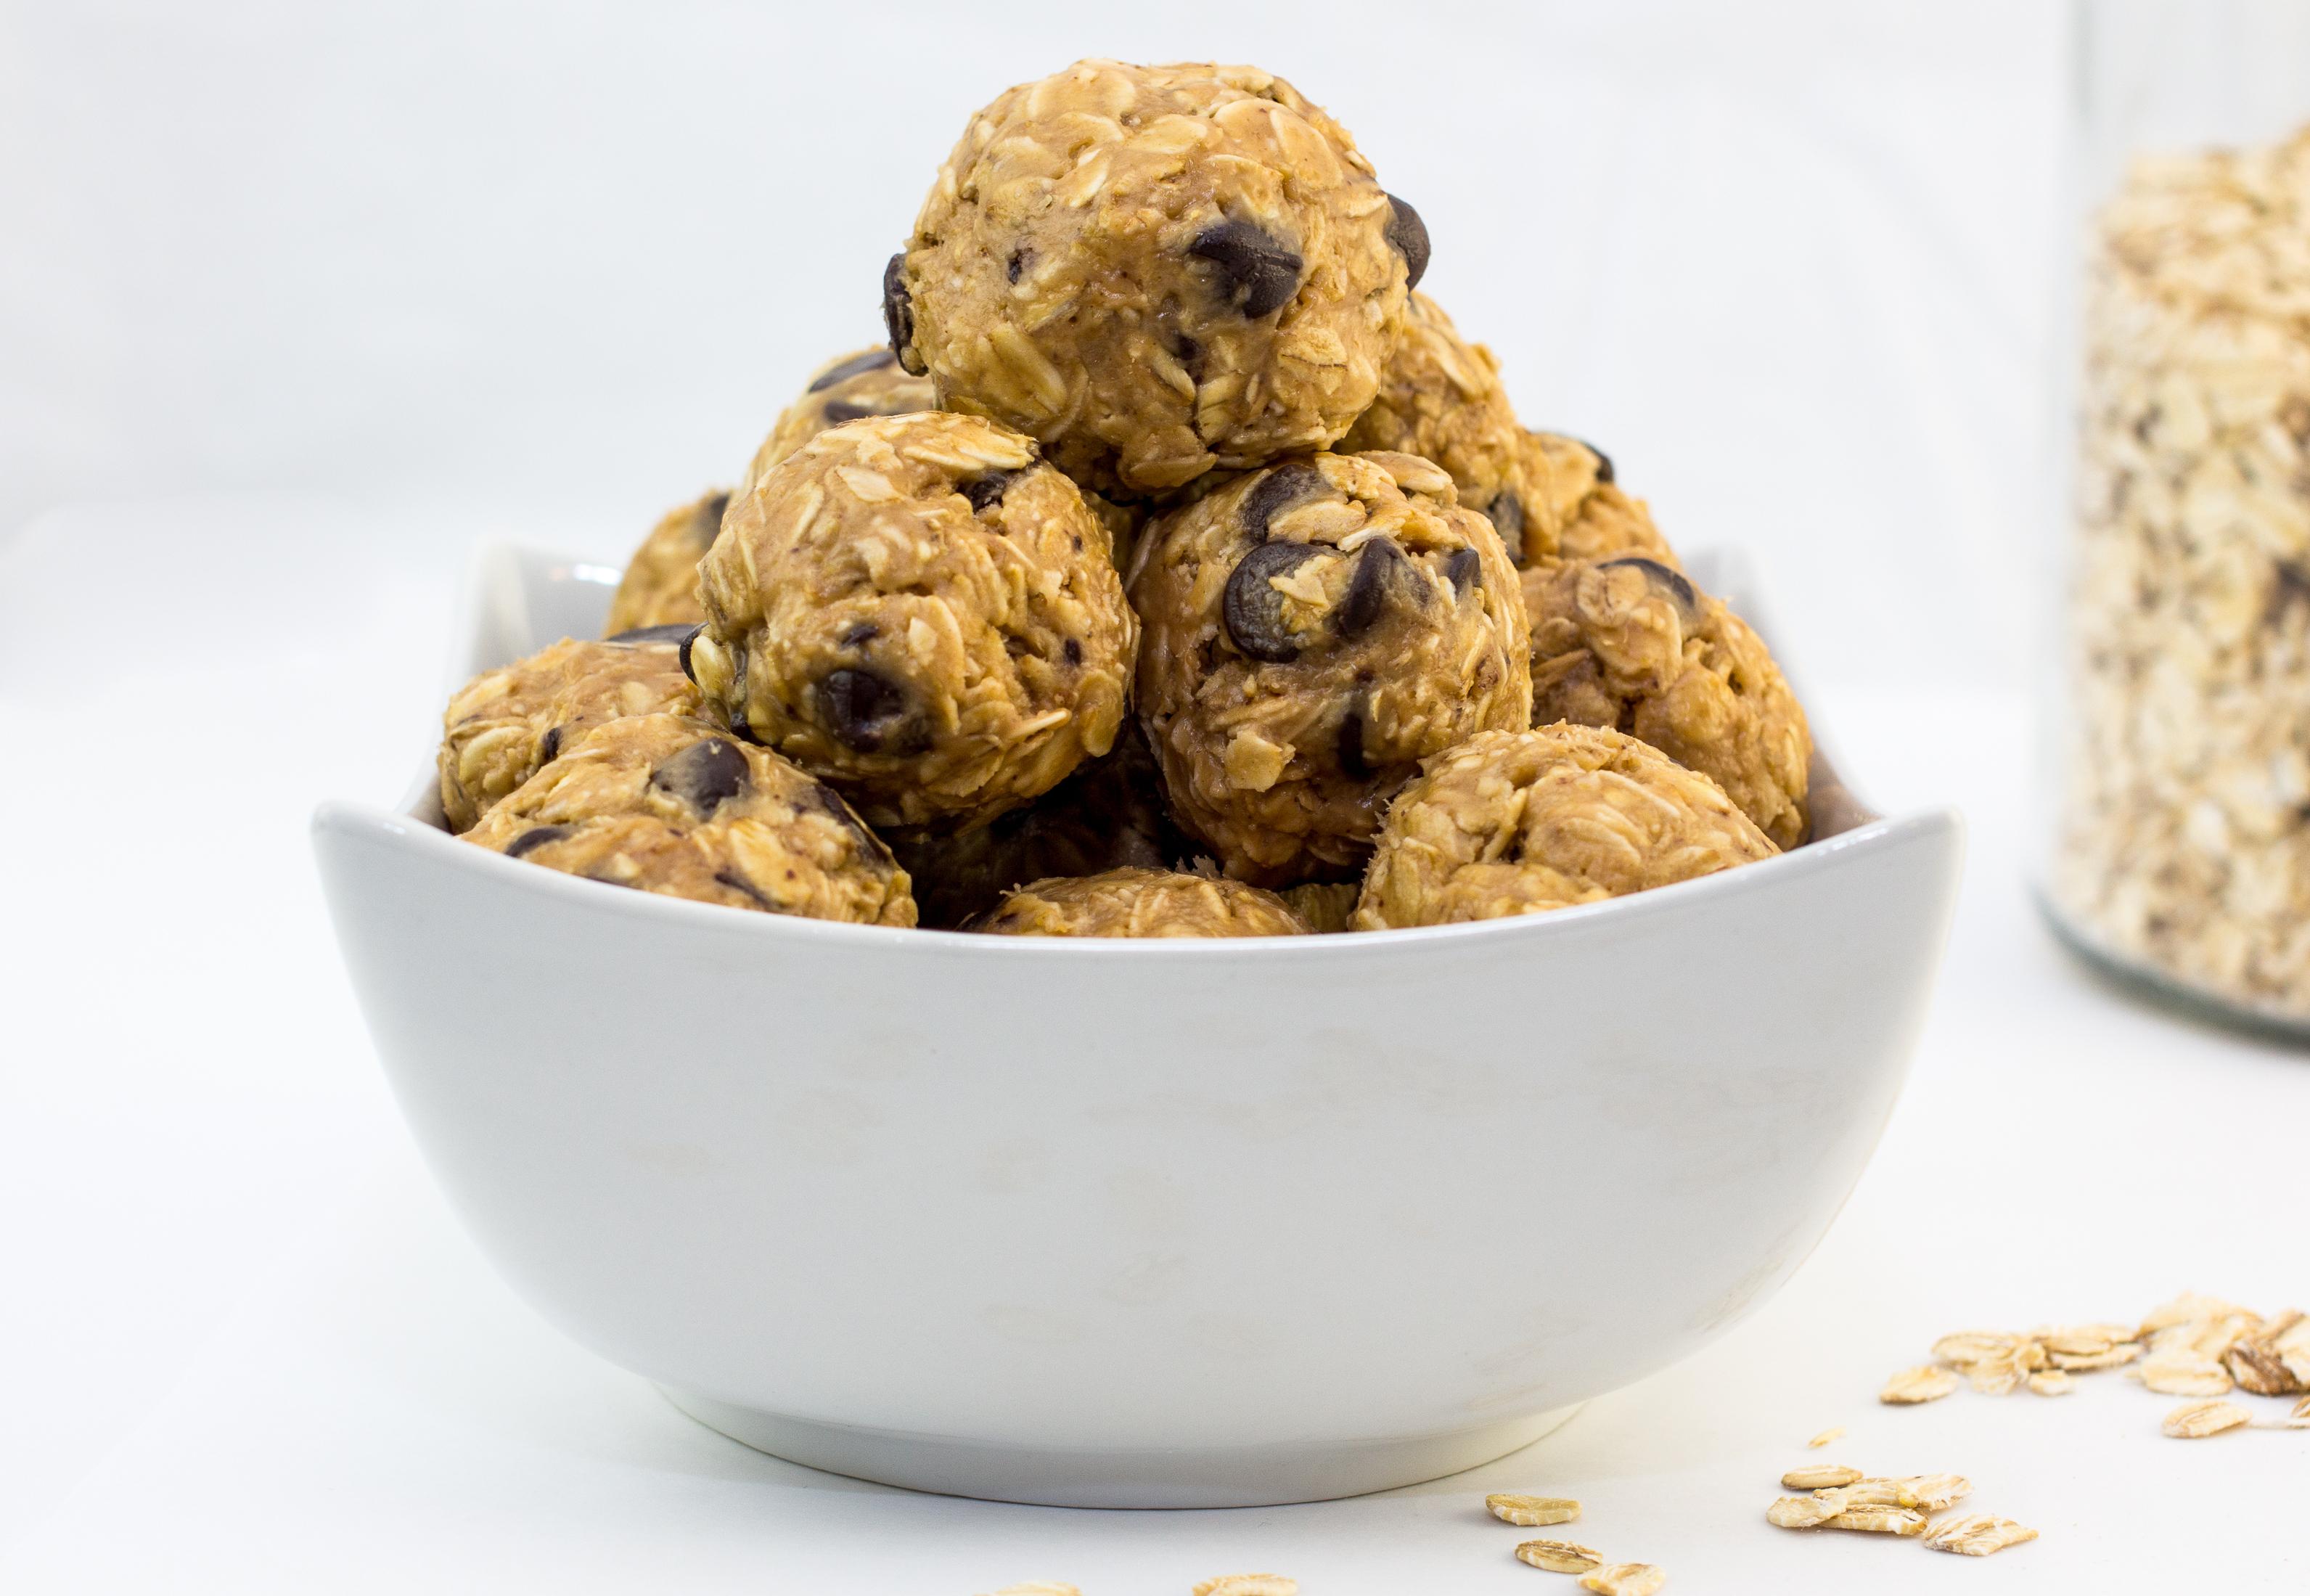 Oatmeal energy bites with chocolate chips and stacked in a white bowl.  (Shutterstock -- LW rights)